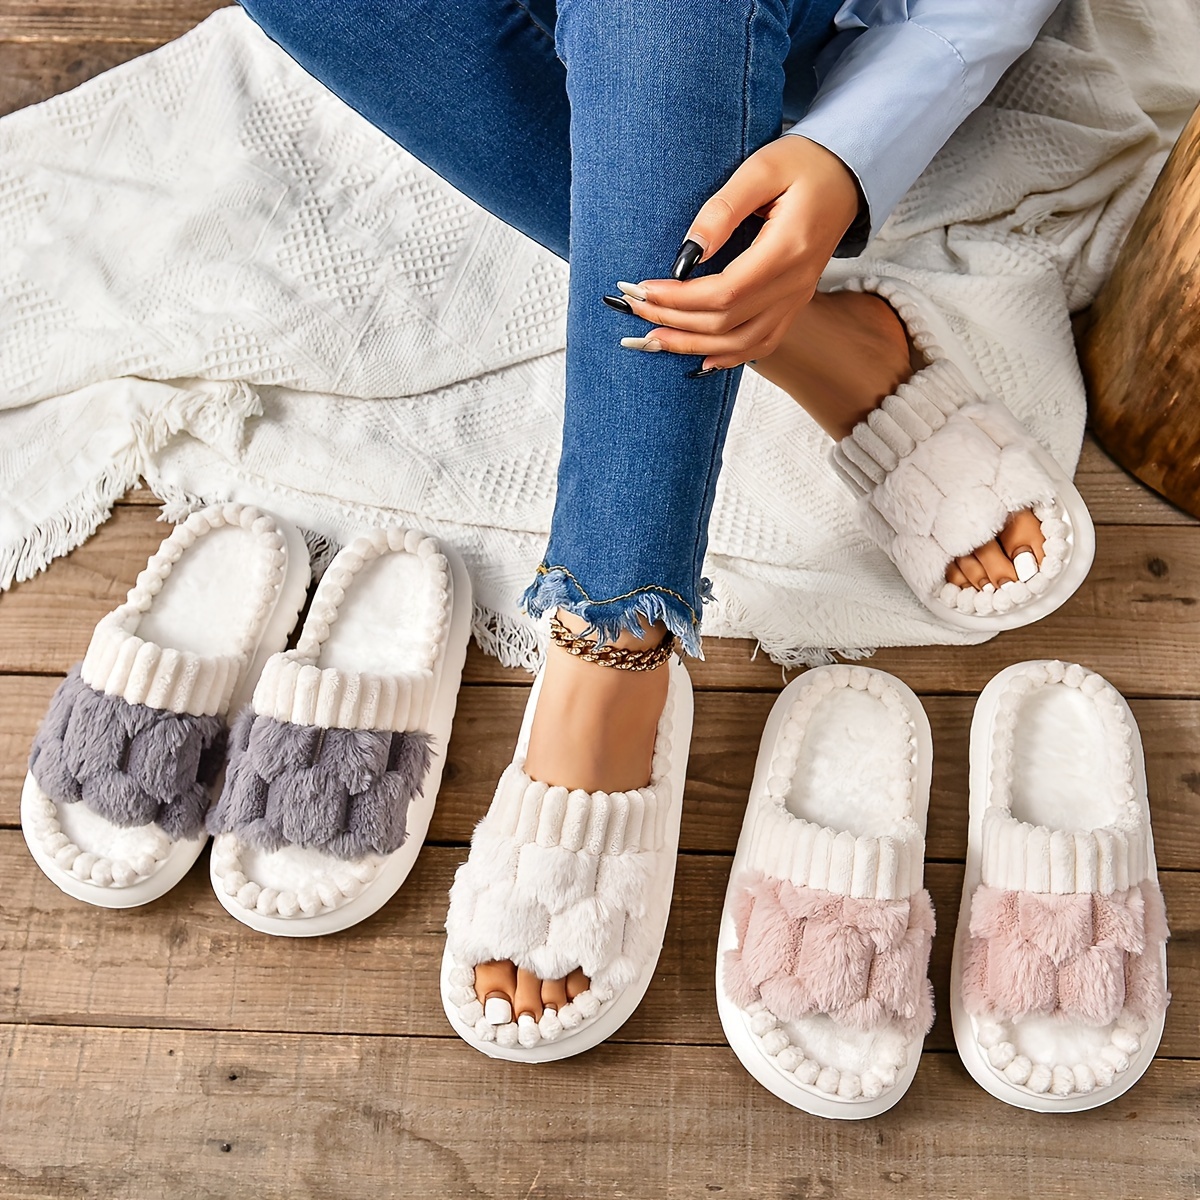 

Honeycomb Plush Slippers For Women, Cozy & Warm Soft Sole Open Toe Shoes, Comfortable Indoor Slippers